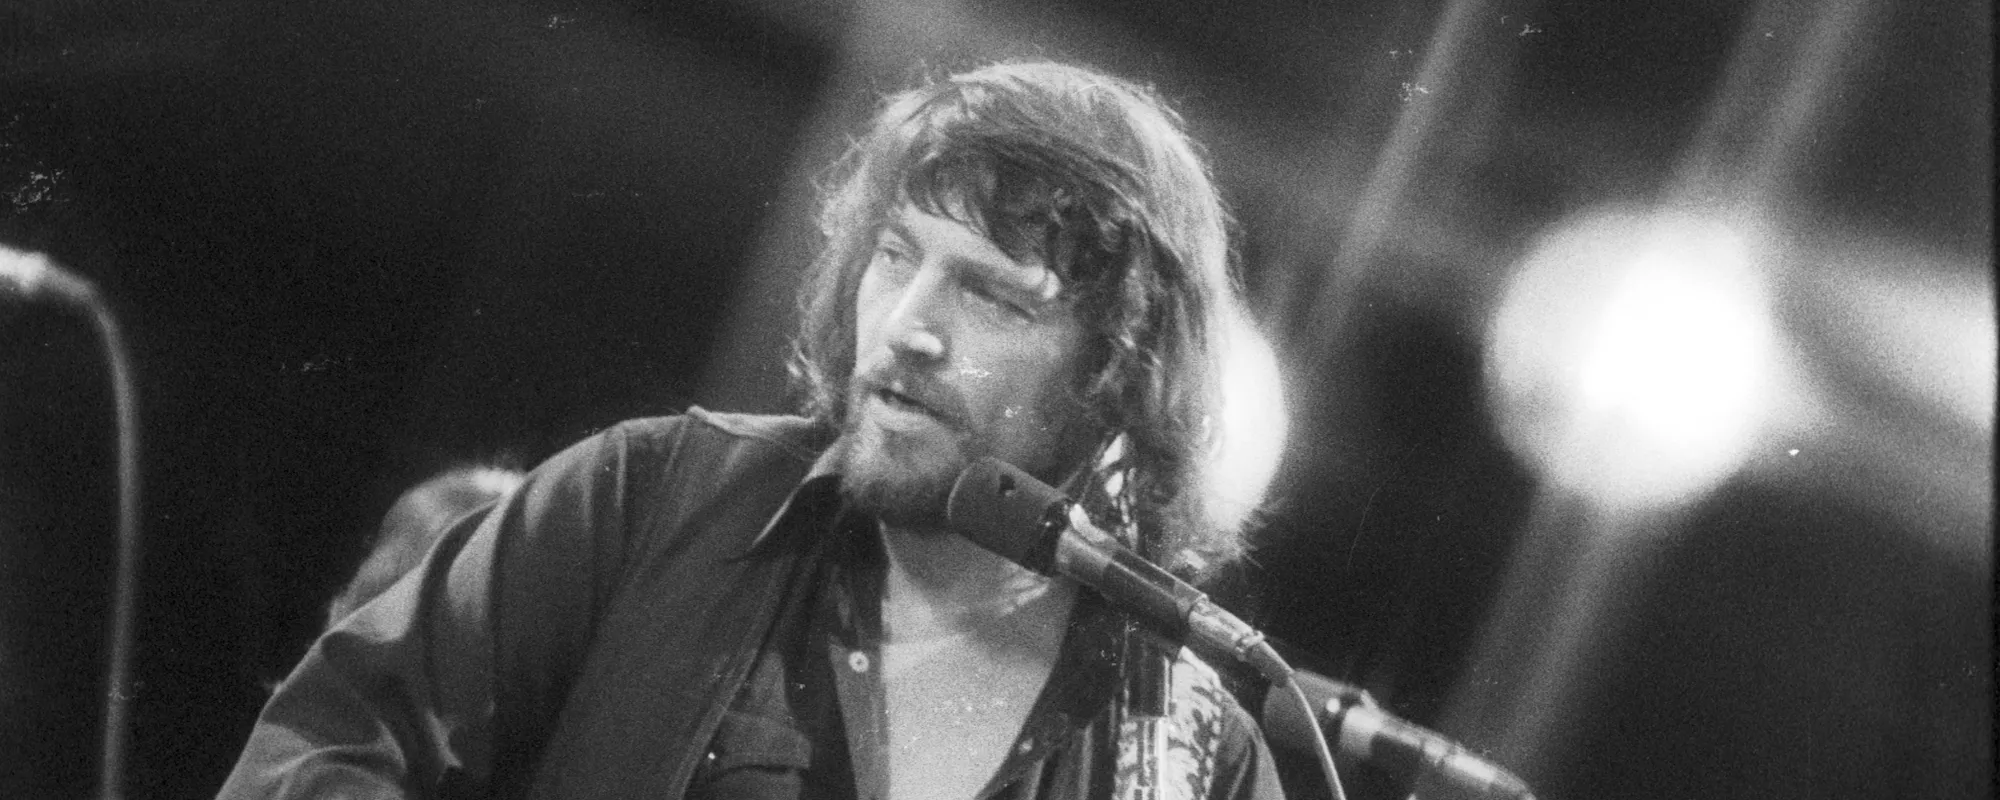 Waylon Jennings Always Disliked Having His Name Mentioned in This 1977 Hit